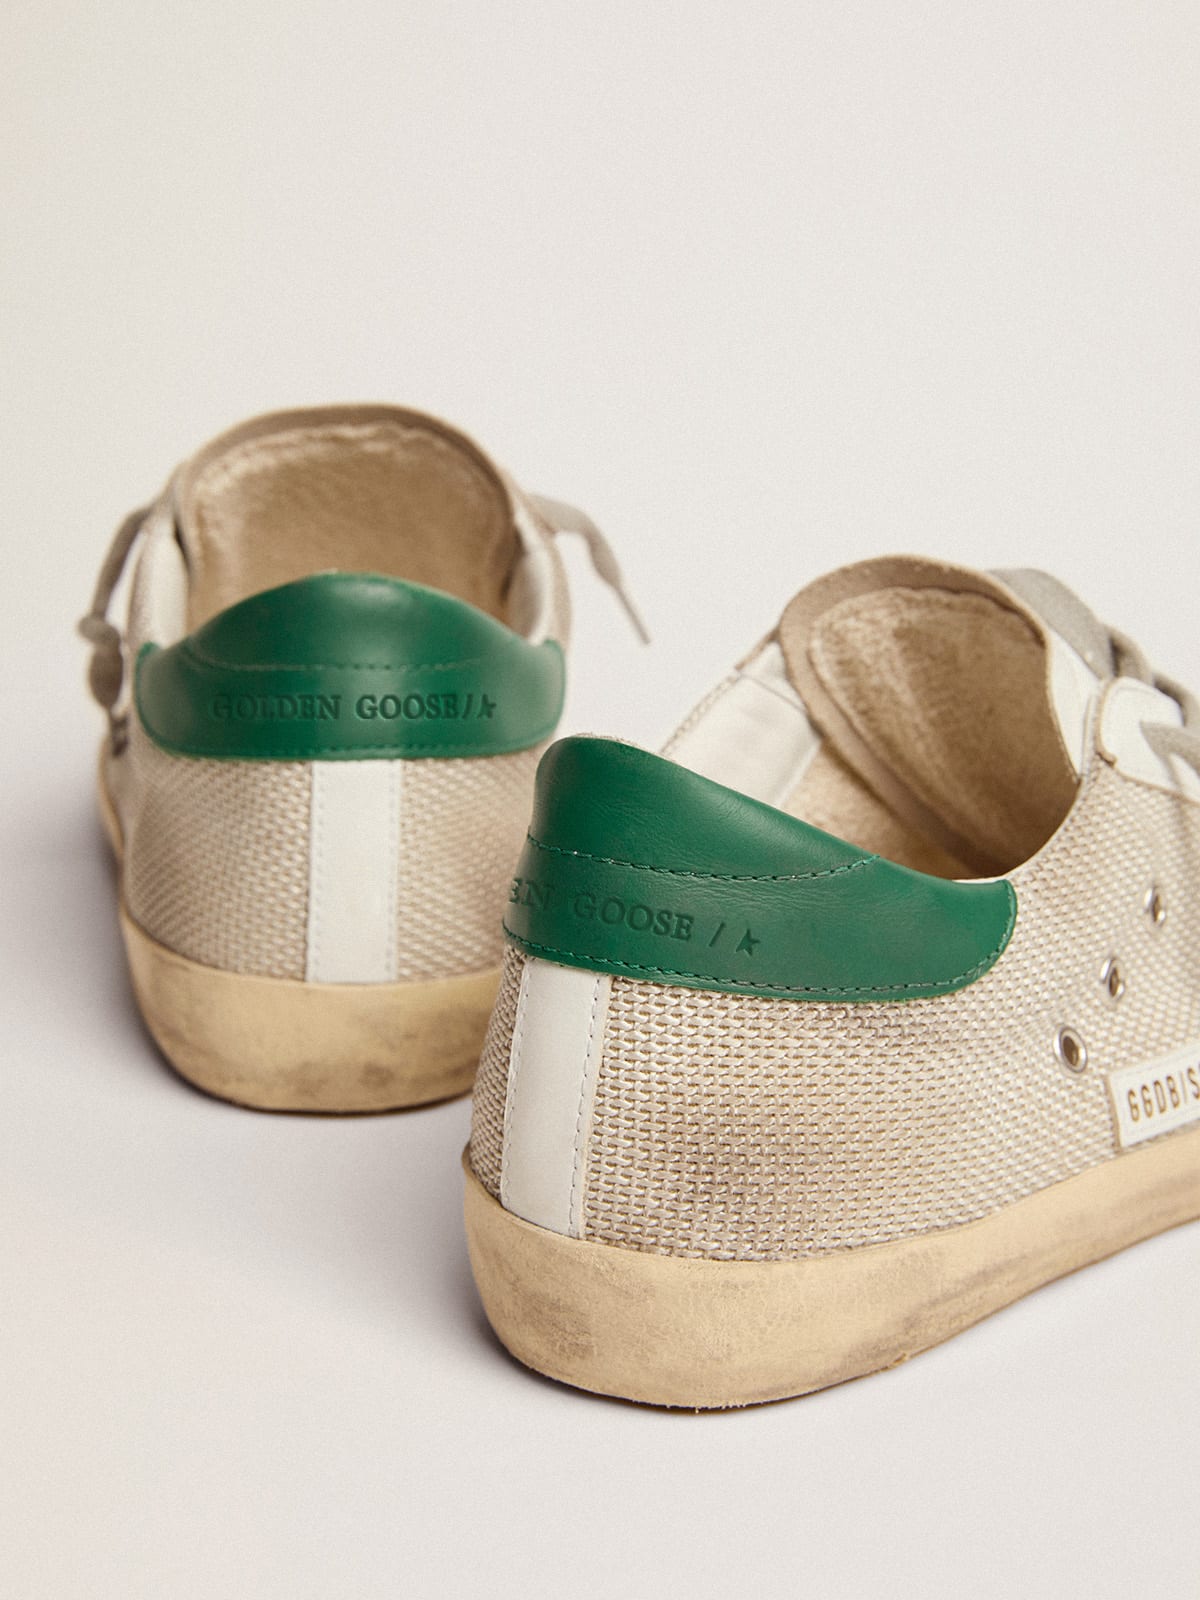 Golden Goose - Super-Star sneakers in pale silver mesh with gray suede star in 